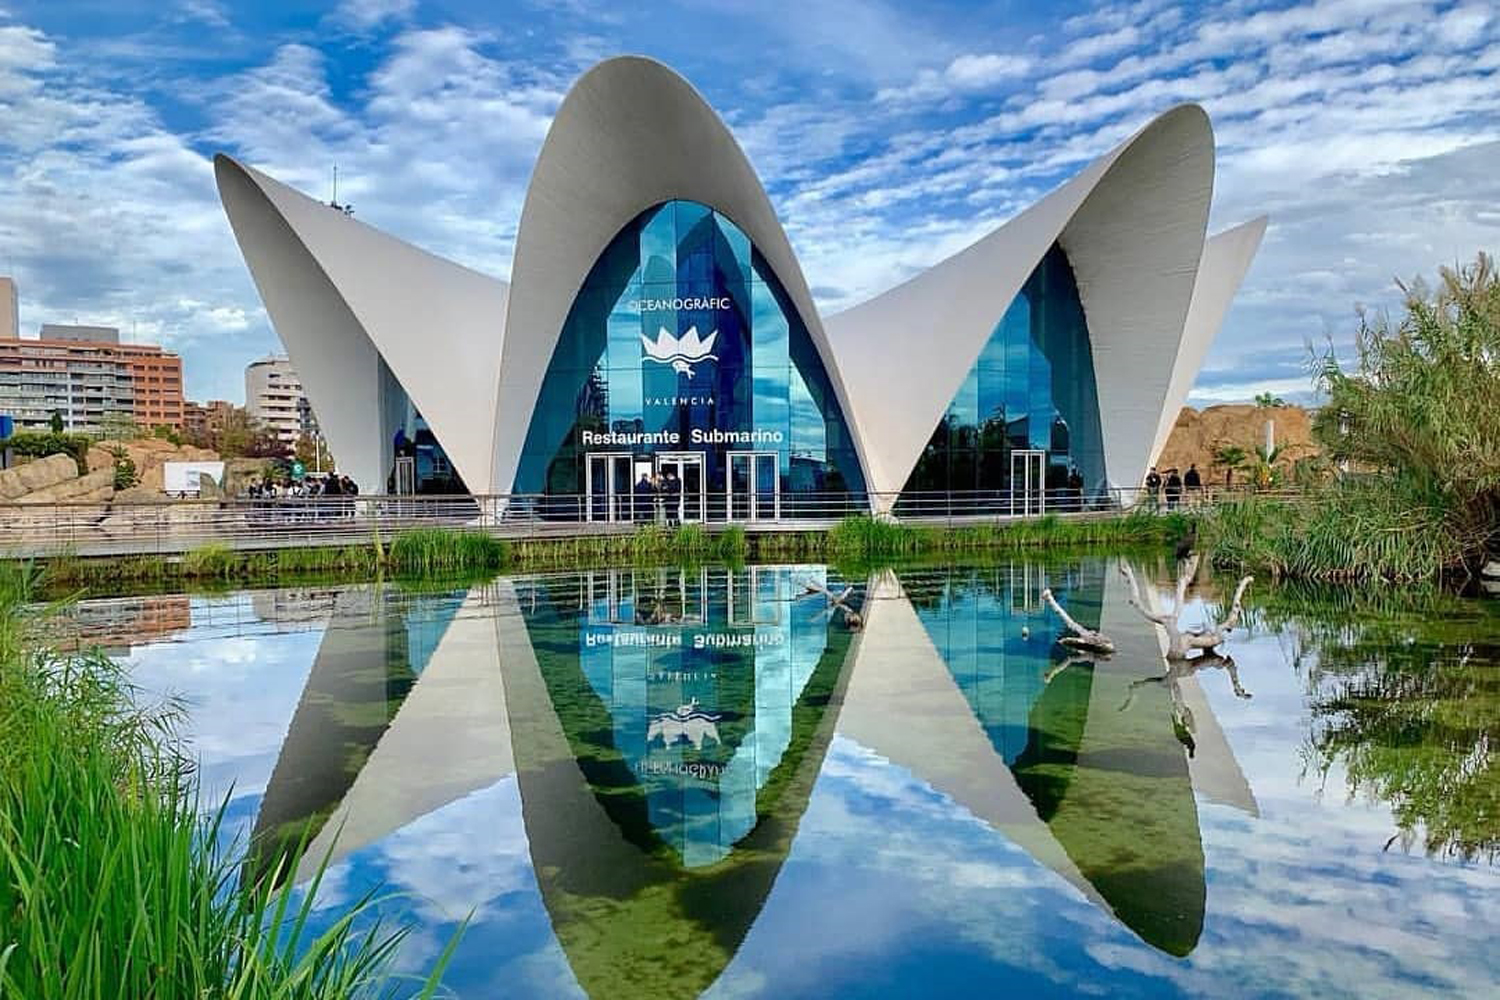 You can explore Europe’s largest aquarium from home in the UAE | Time